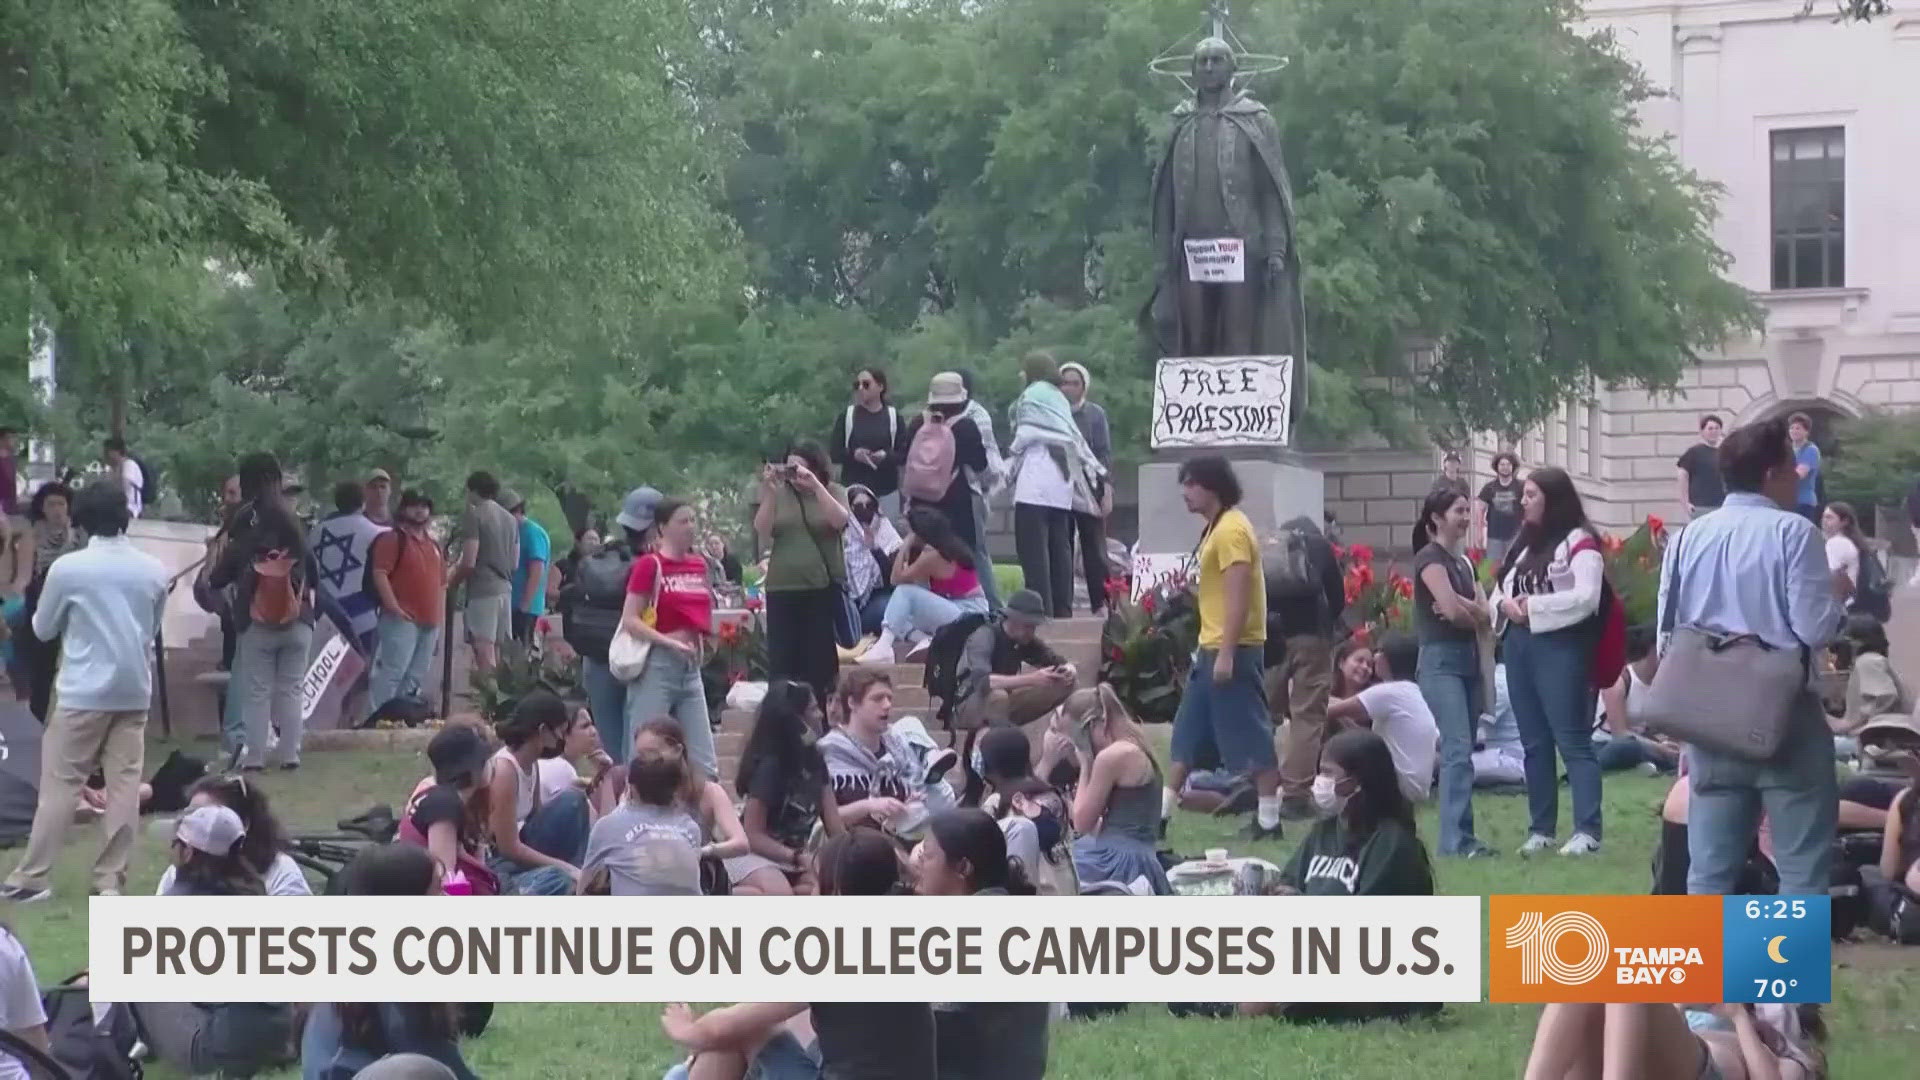 The University of Southern California canceled its main graduation ceremony over security concerns, and more than 50 people were arrested at the University of Texas.